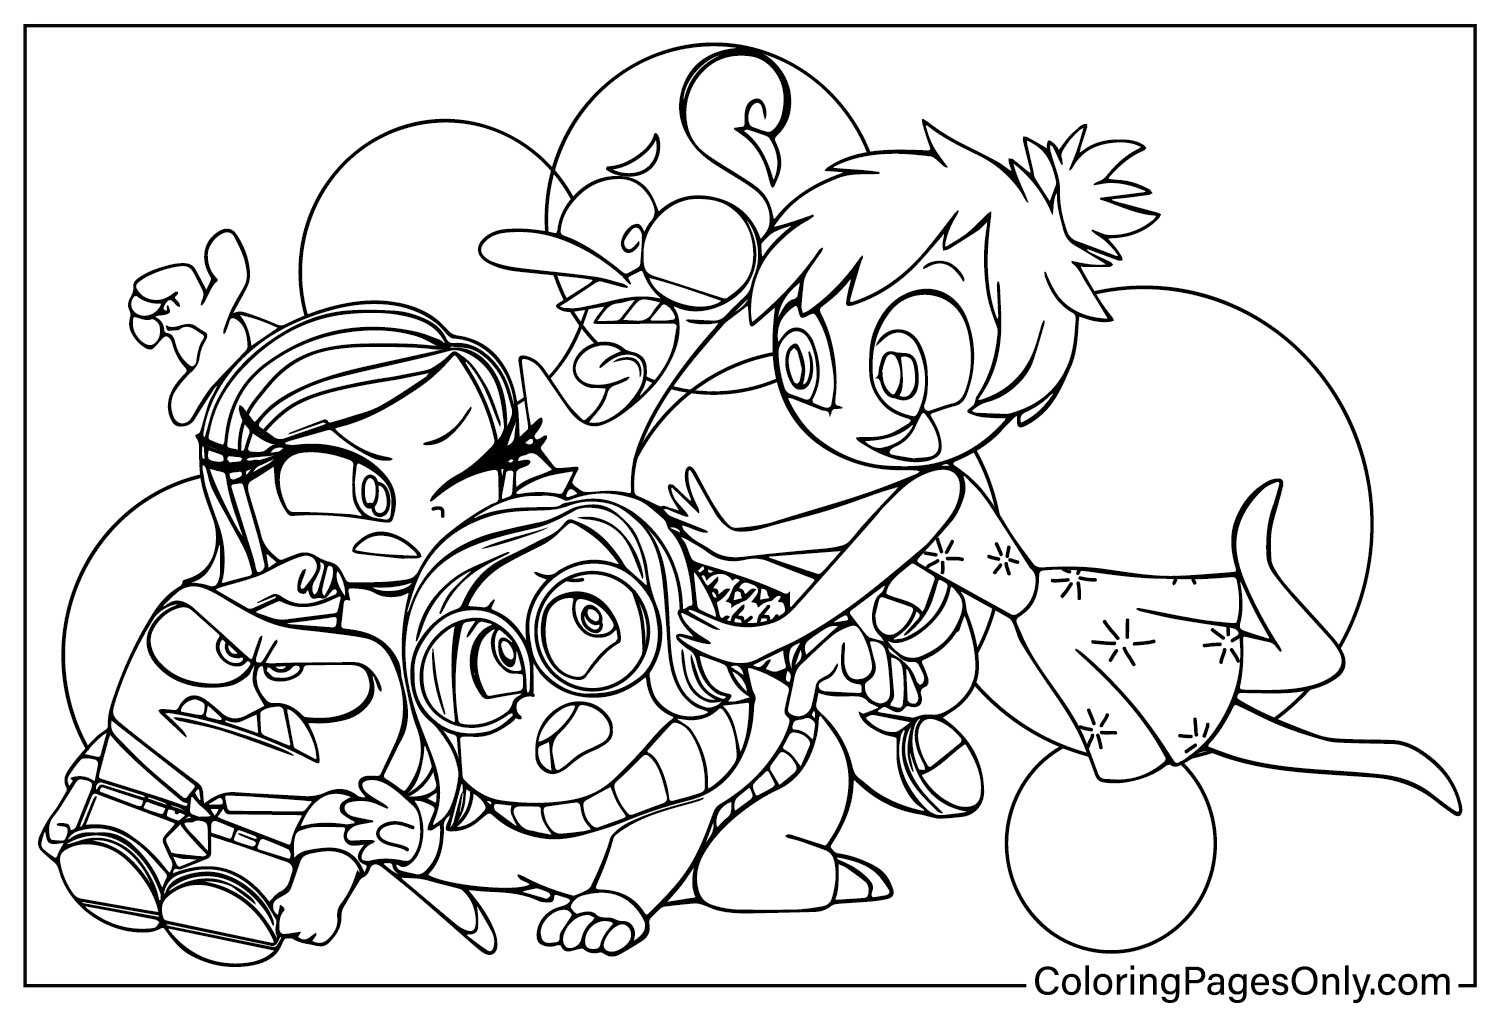 Five characters from Inside Out 2 Coloring Page from Inside Out 2